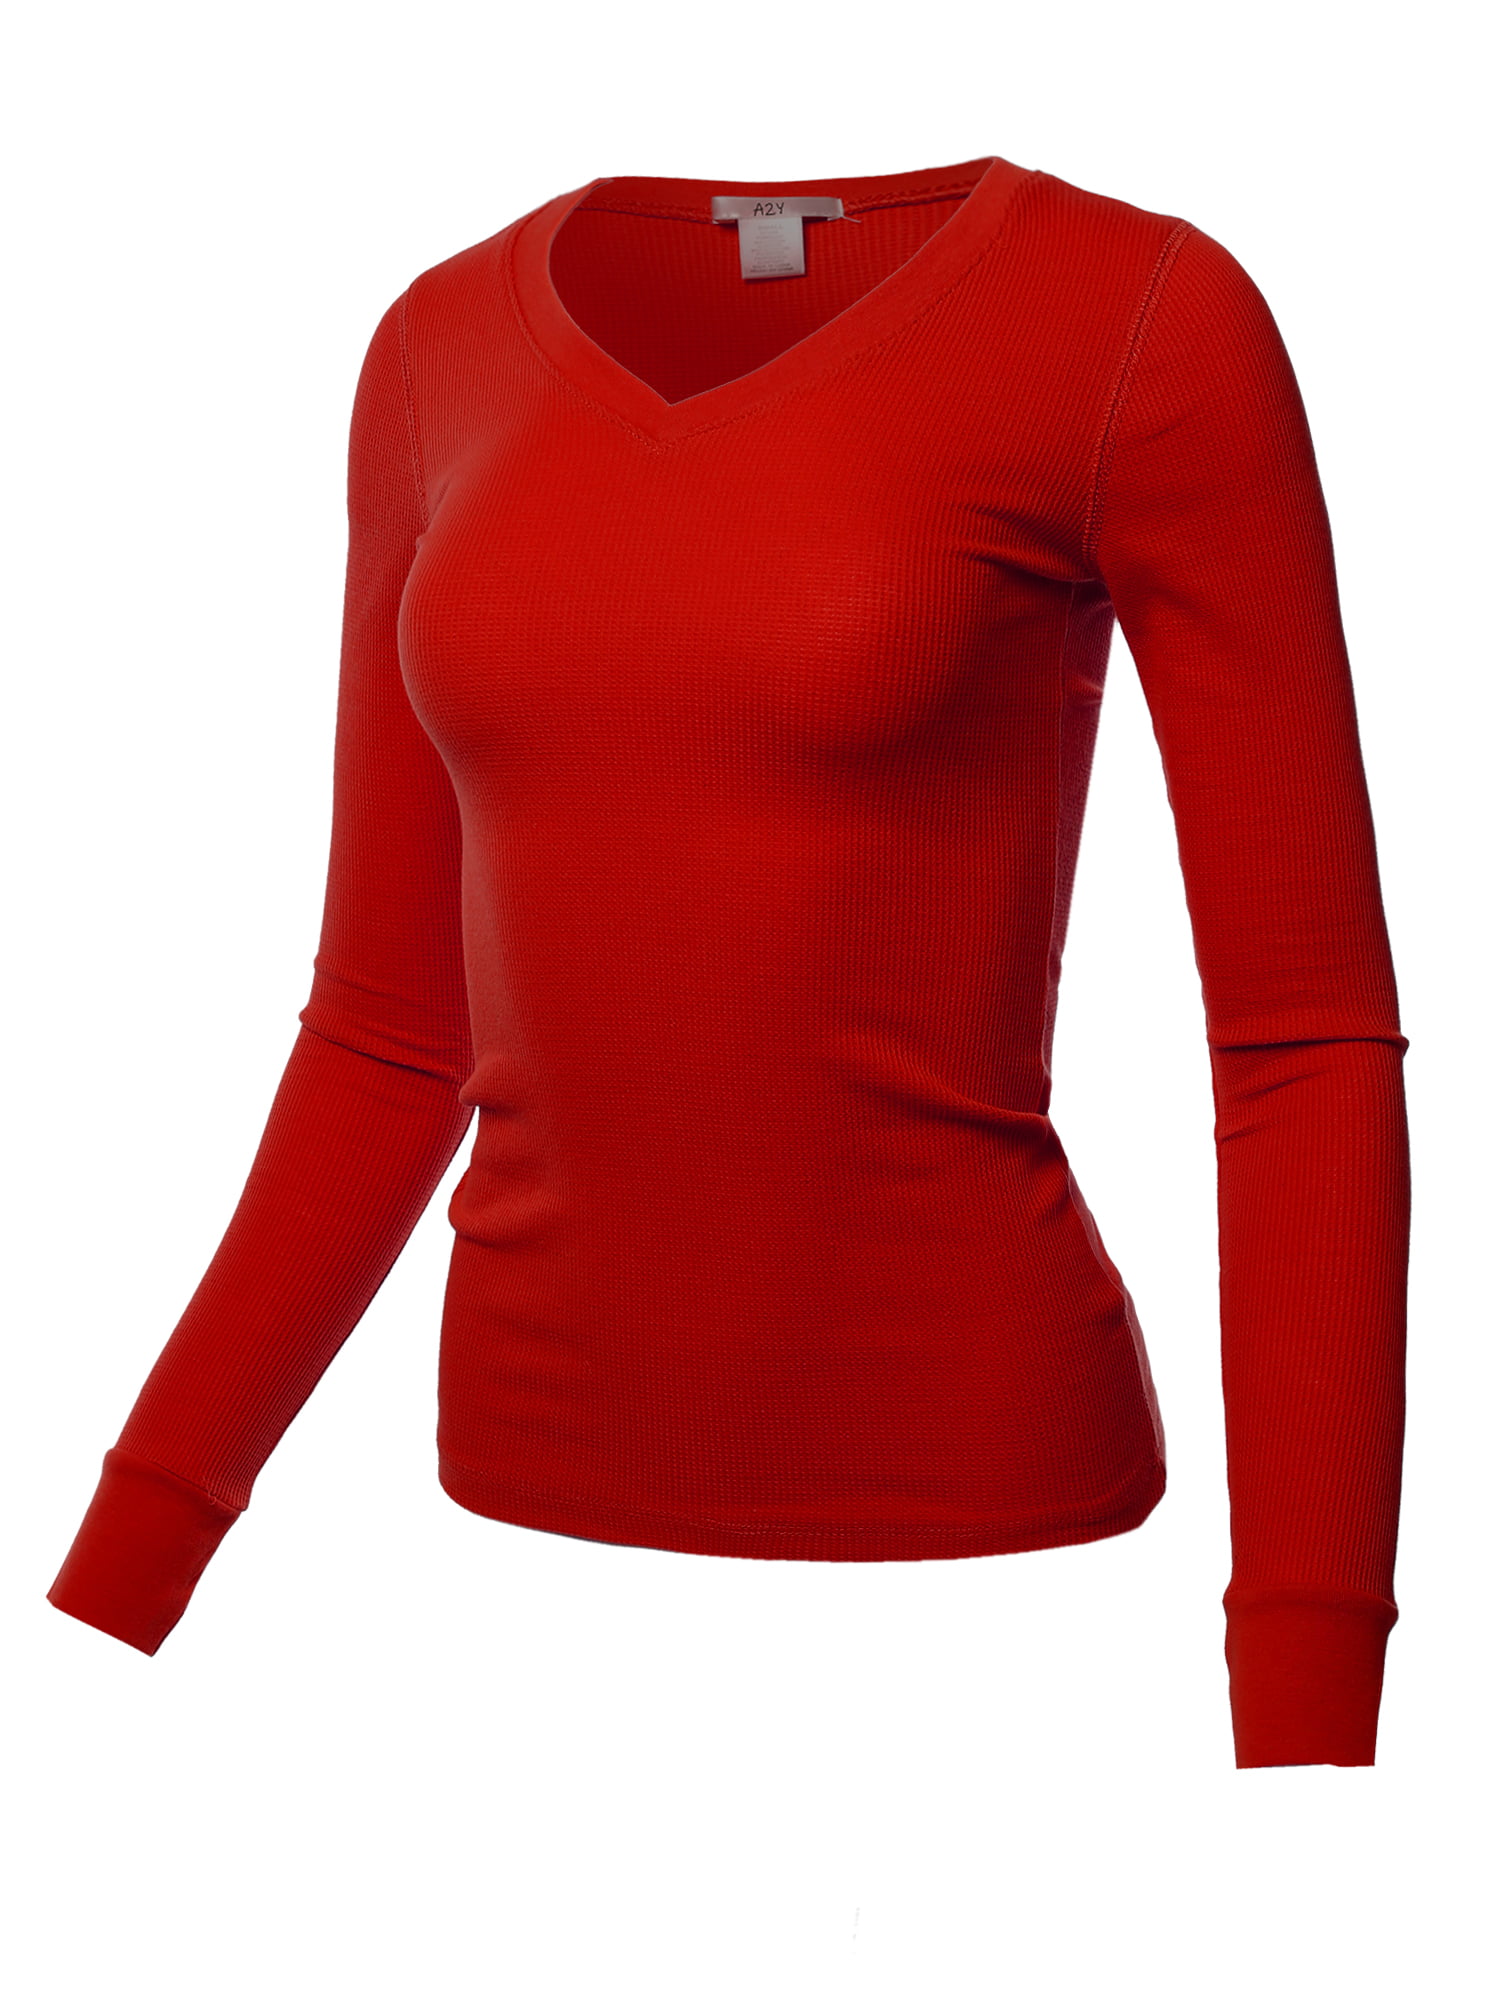 Guter Preis A2Y Women\'s Basic Solid Fitted Top V-Neck 3XL Sleeve Long Red Thermal Shirt Scarlet